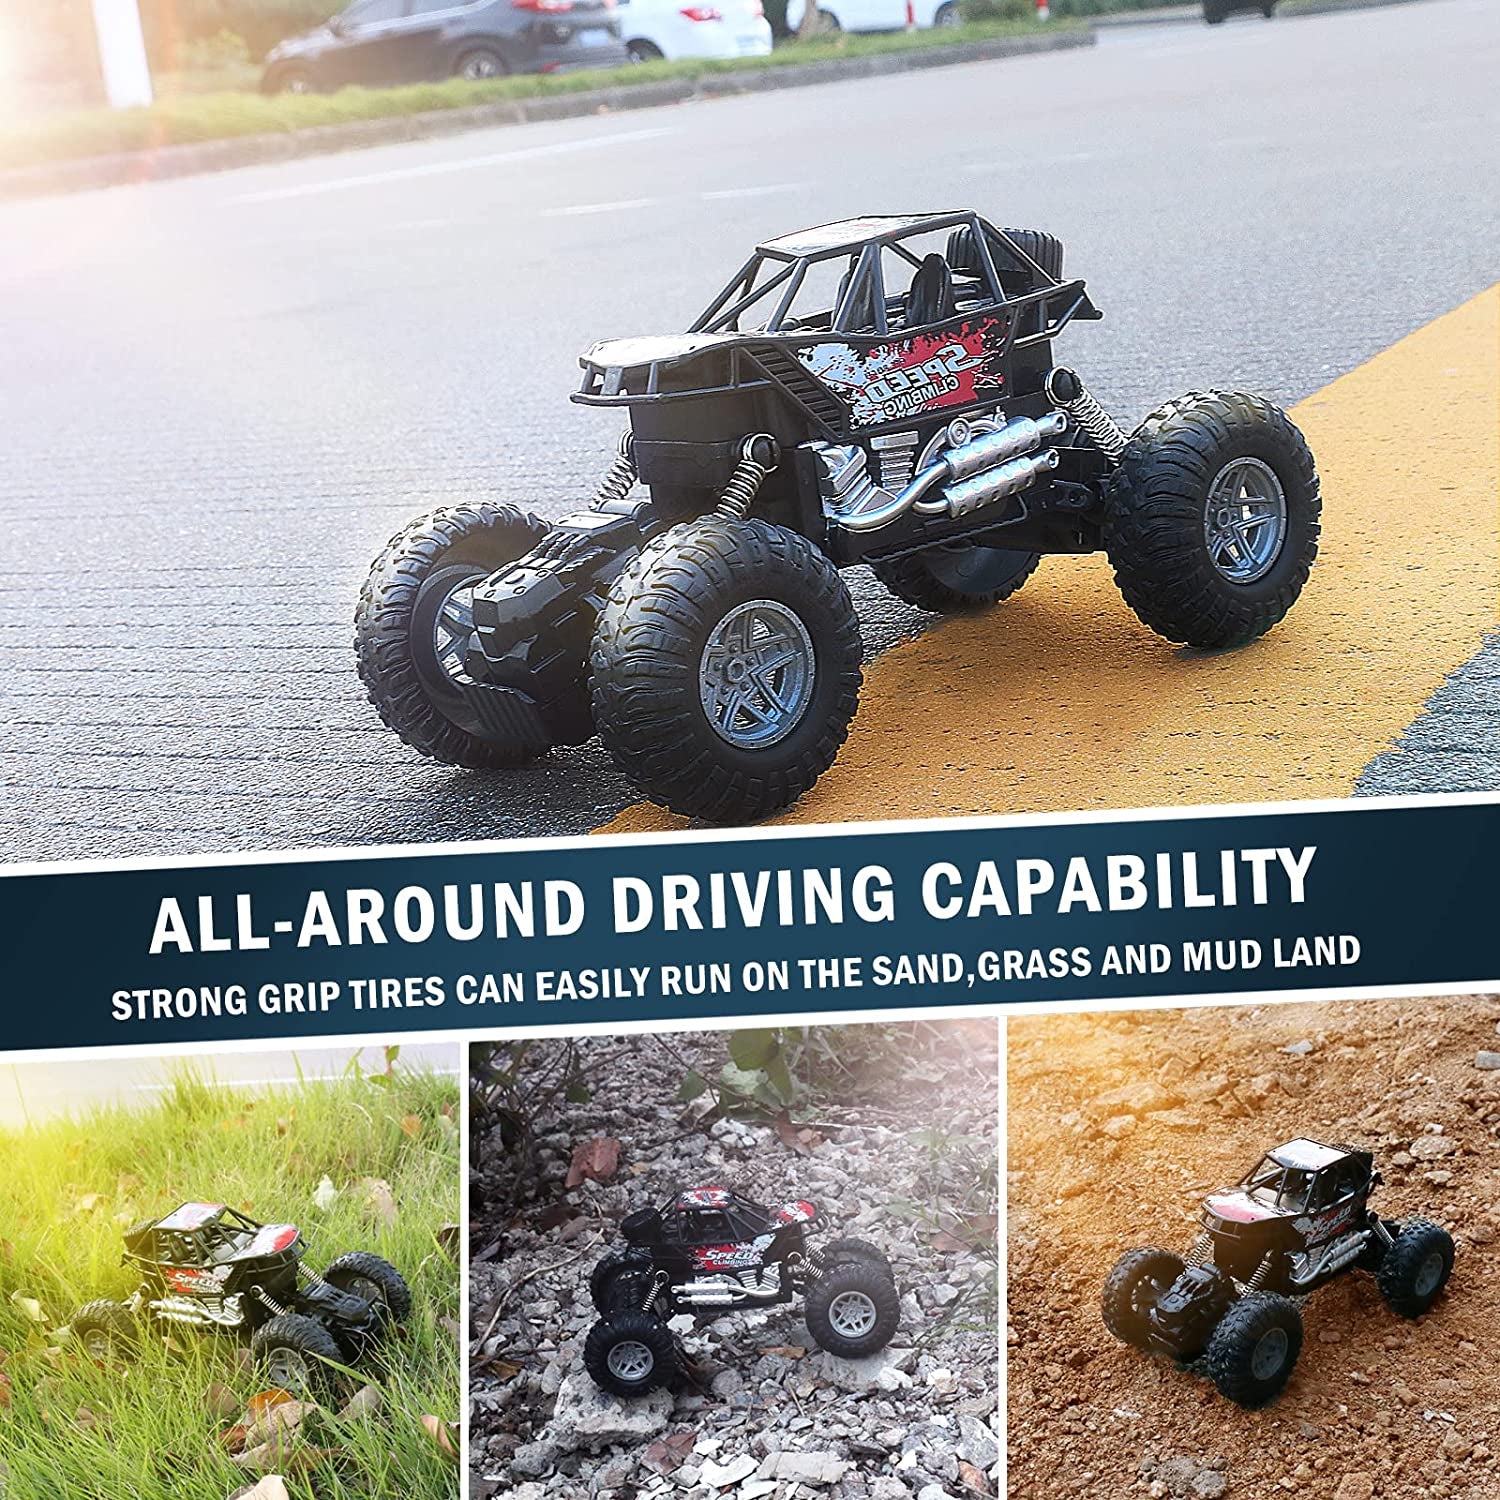 1:18 Scale All Terrains RC Monster Vehicle Truck Crawler, 4WD High Speed Electric Vehicle with Remote Control, off Road Truck with Two Rechargeable Batteries for Boys Kids and Adults(Red)